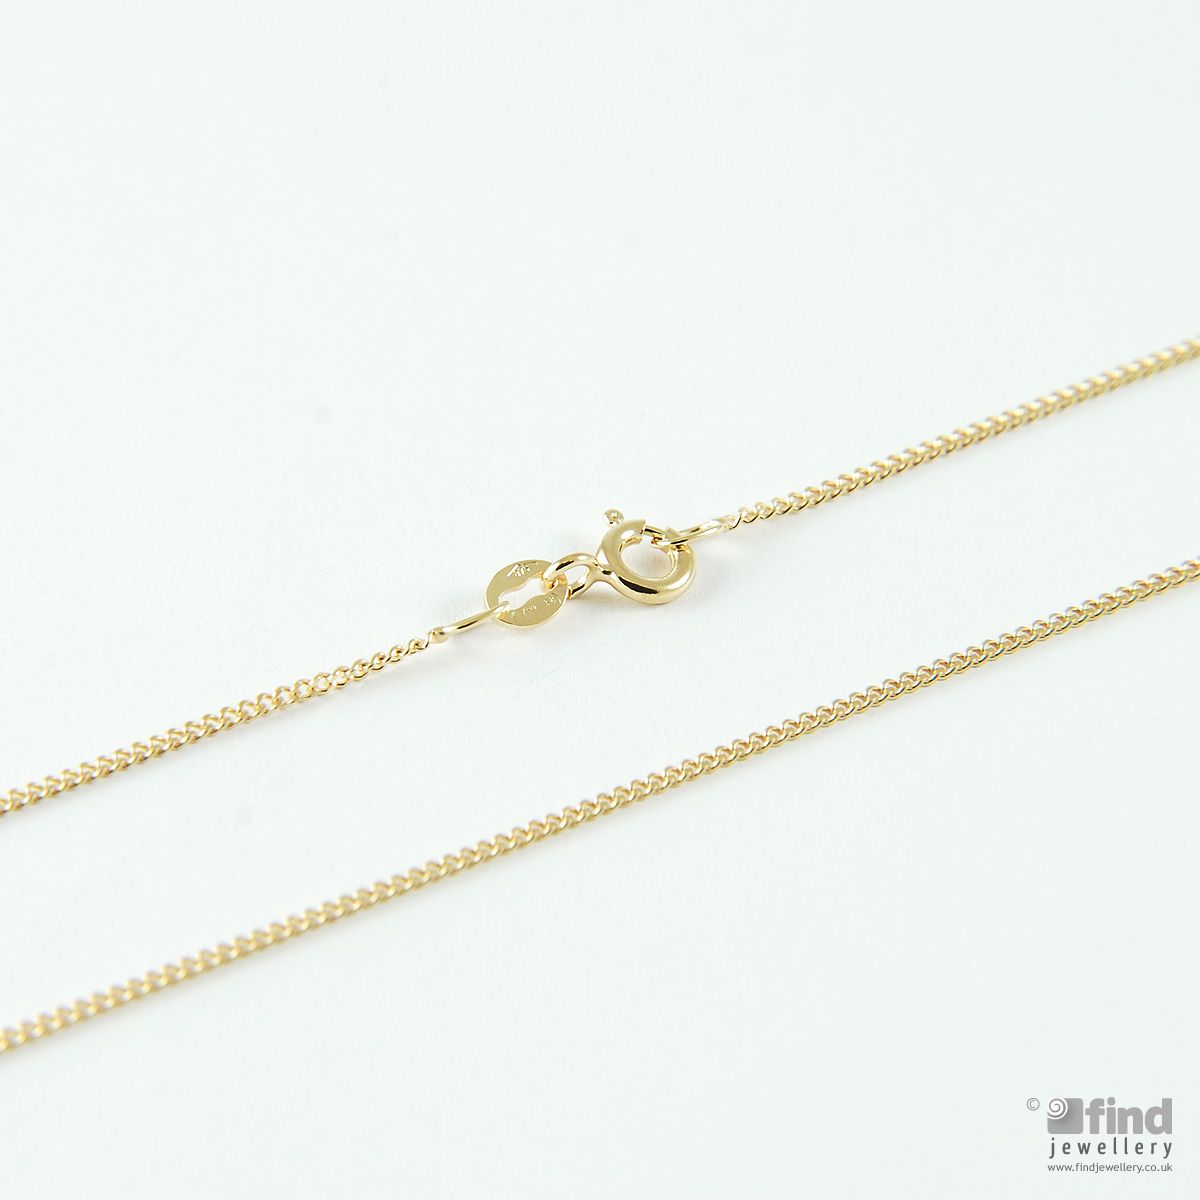 Unbranded 20 inch 9ct Gold Curb Chain